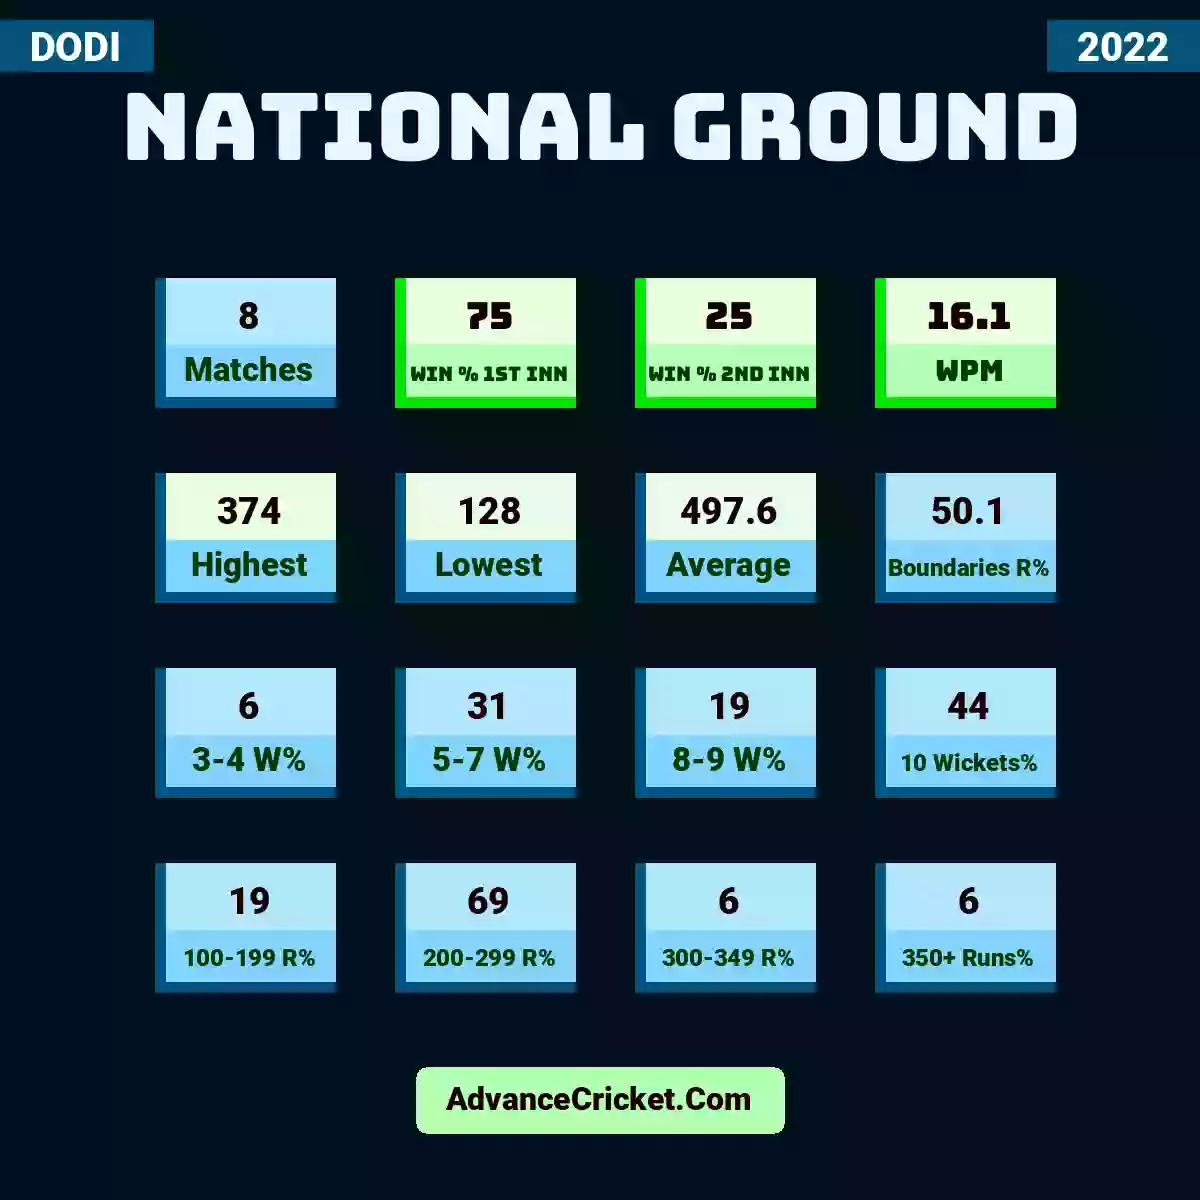 Image showing National Ground with Matches: 8, Win % 1st Inn: 75, Win % 2nd Inn: 25, WPM: 16.1, Highest: 374, Lowest: 128, Average: 497.6, Boundaries R%: 50.1, 3-4 W%: 6, 5-7 W%: 31, 8-9 W%: 19, 10 Wickets%: 44, 100-199 R%: 19, 200-299 R%: 69, 300-349 R%: 6, 350+ Runs%: 6.